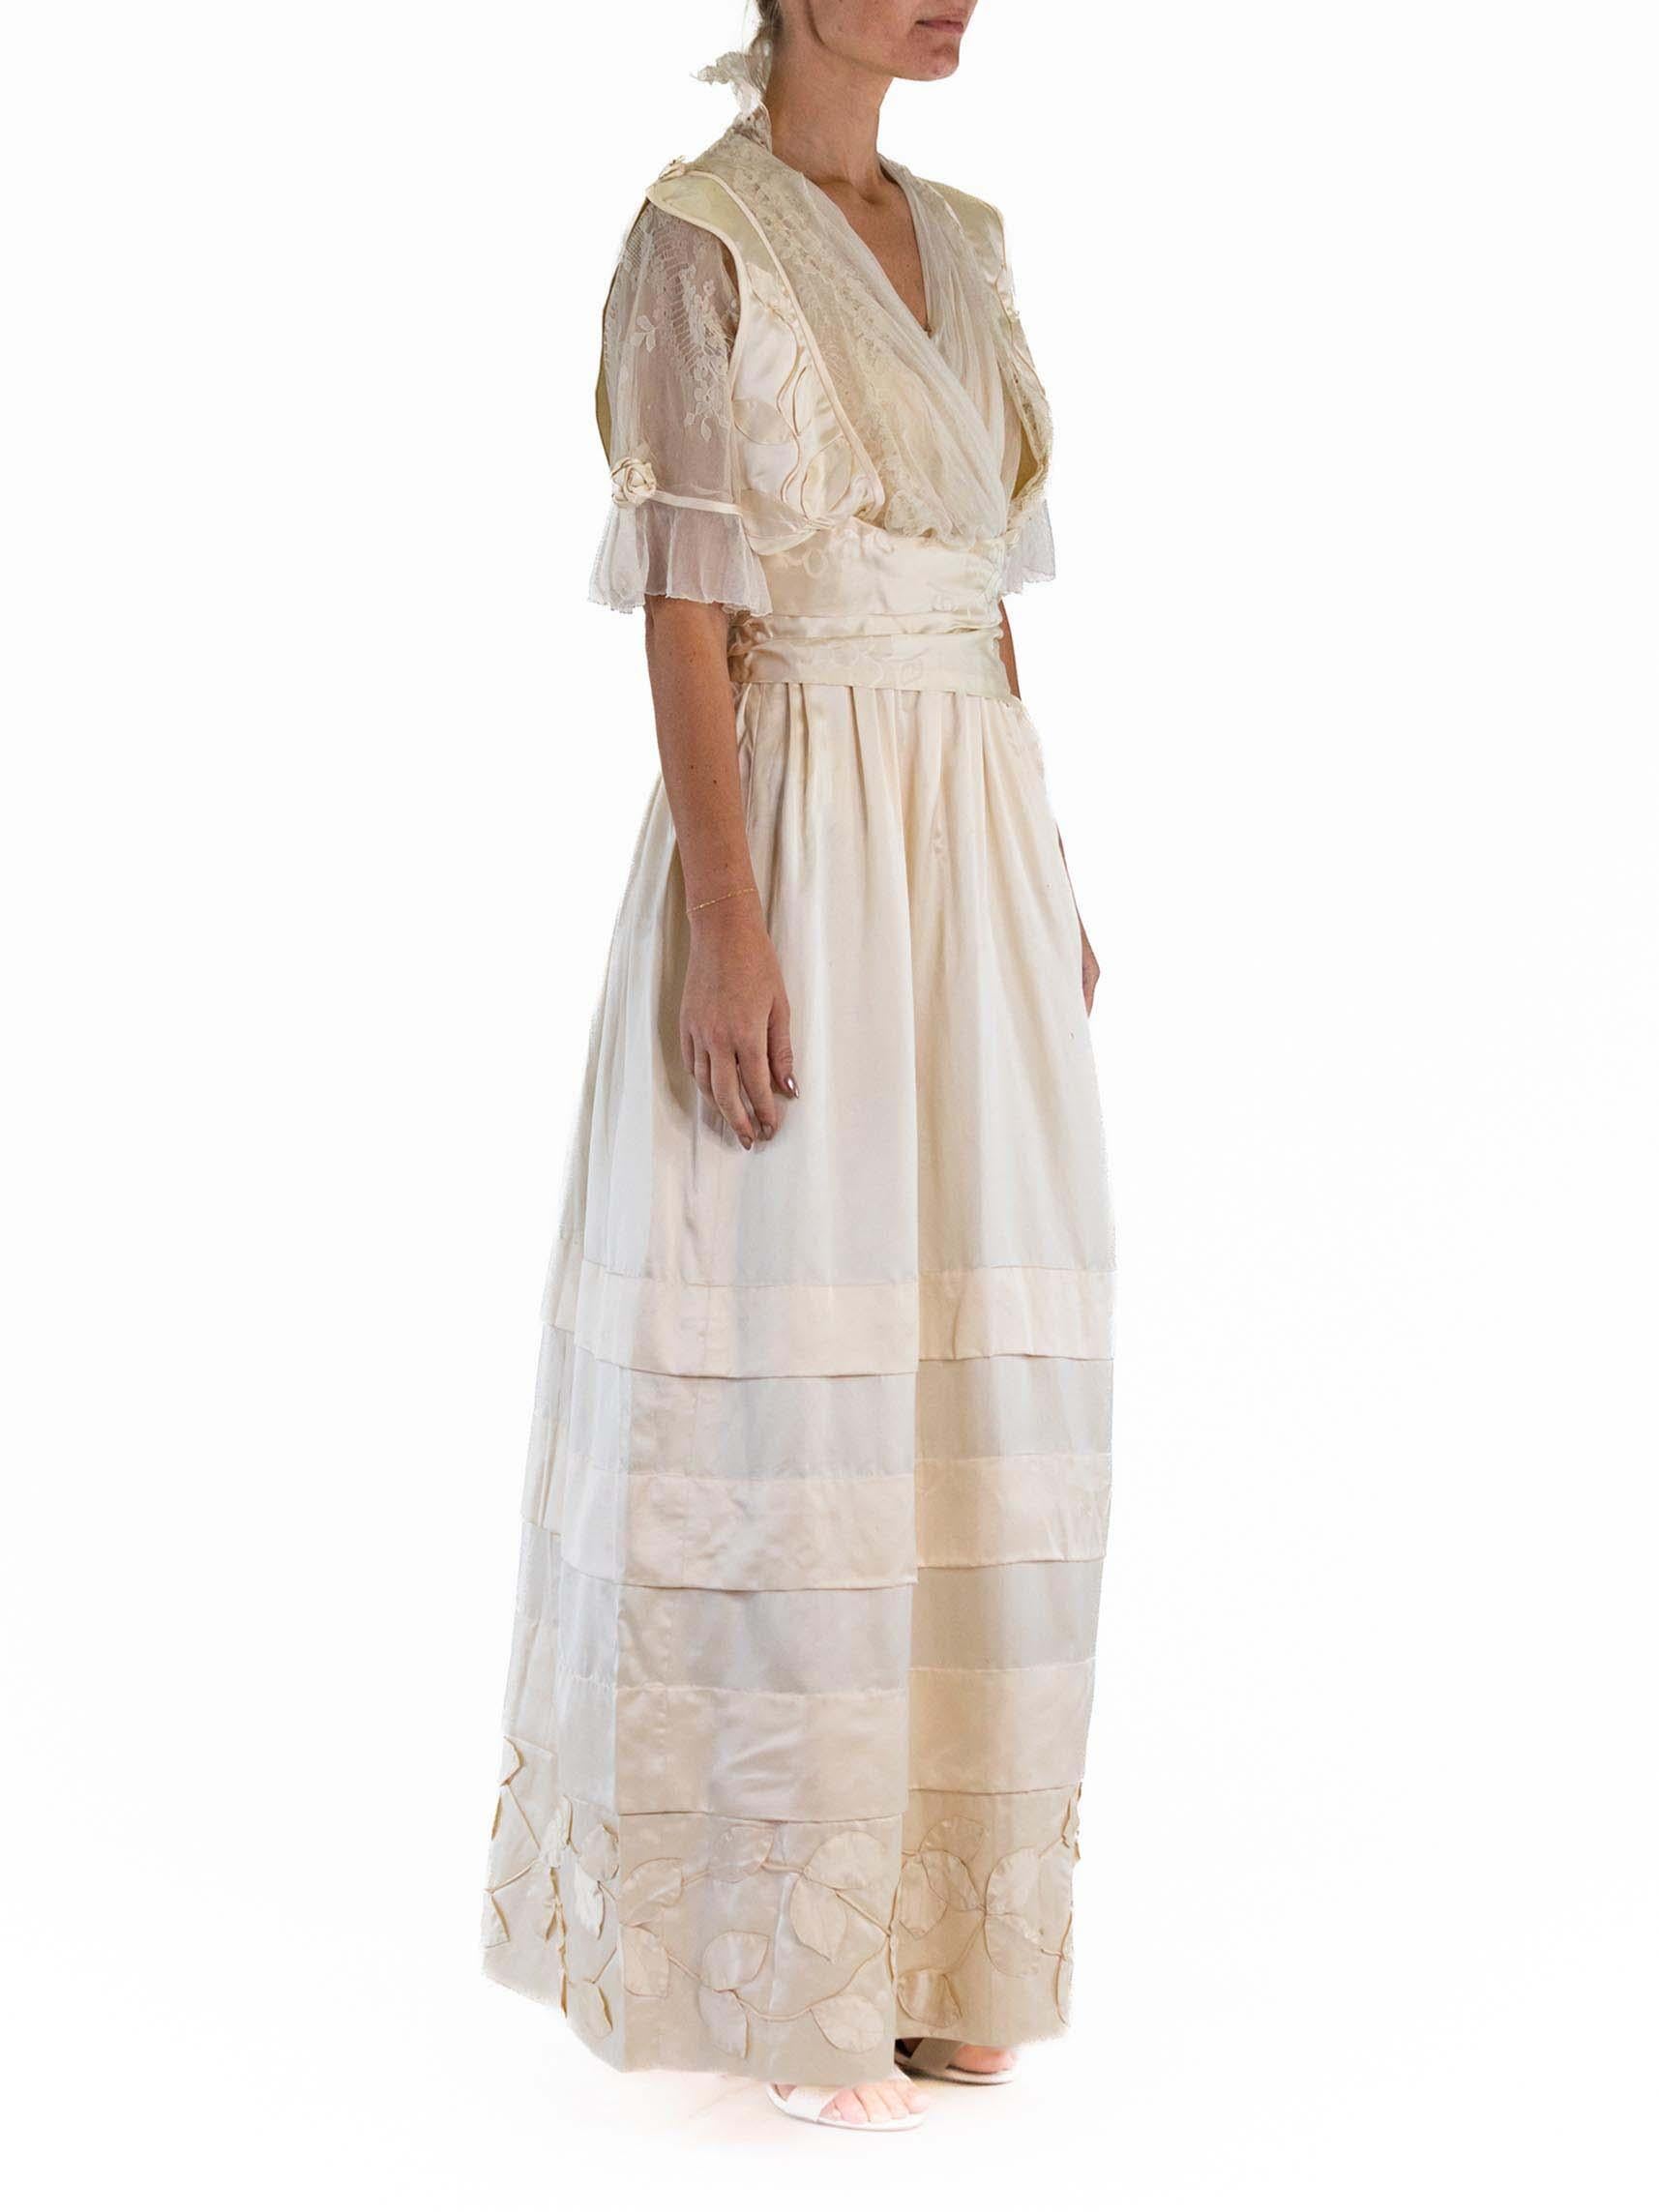 Edwardian Cream Silk Satin & Lace Rare Wedding Or Presentation Gown In Excellent Condition For Sale In New York, NY